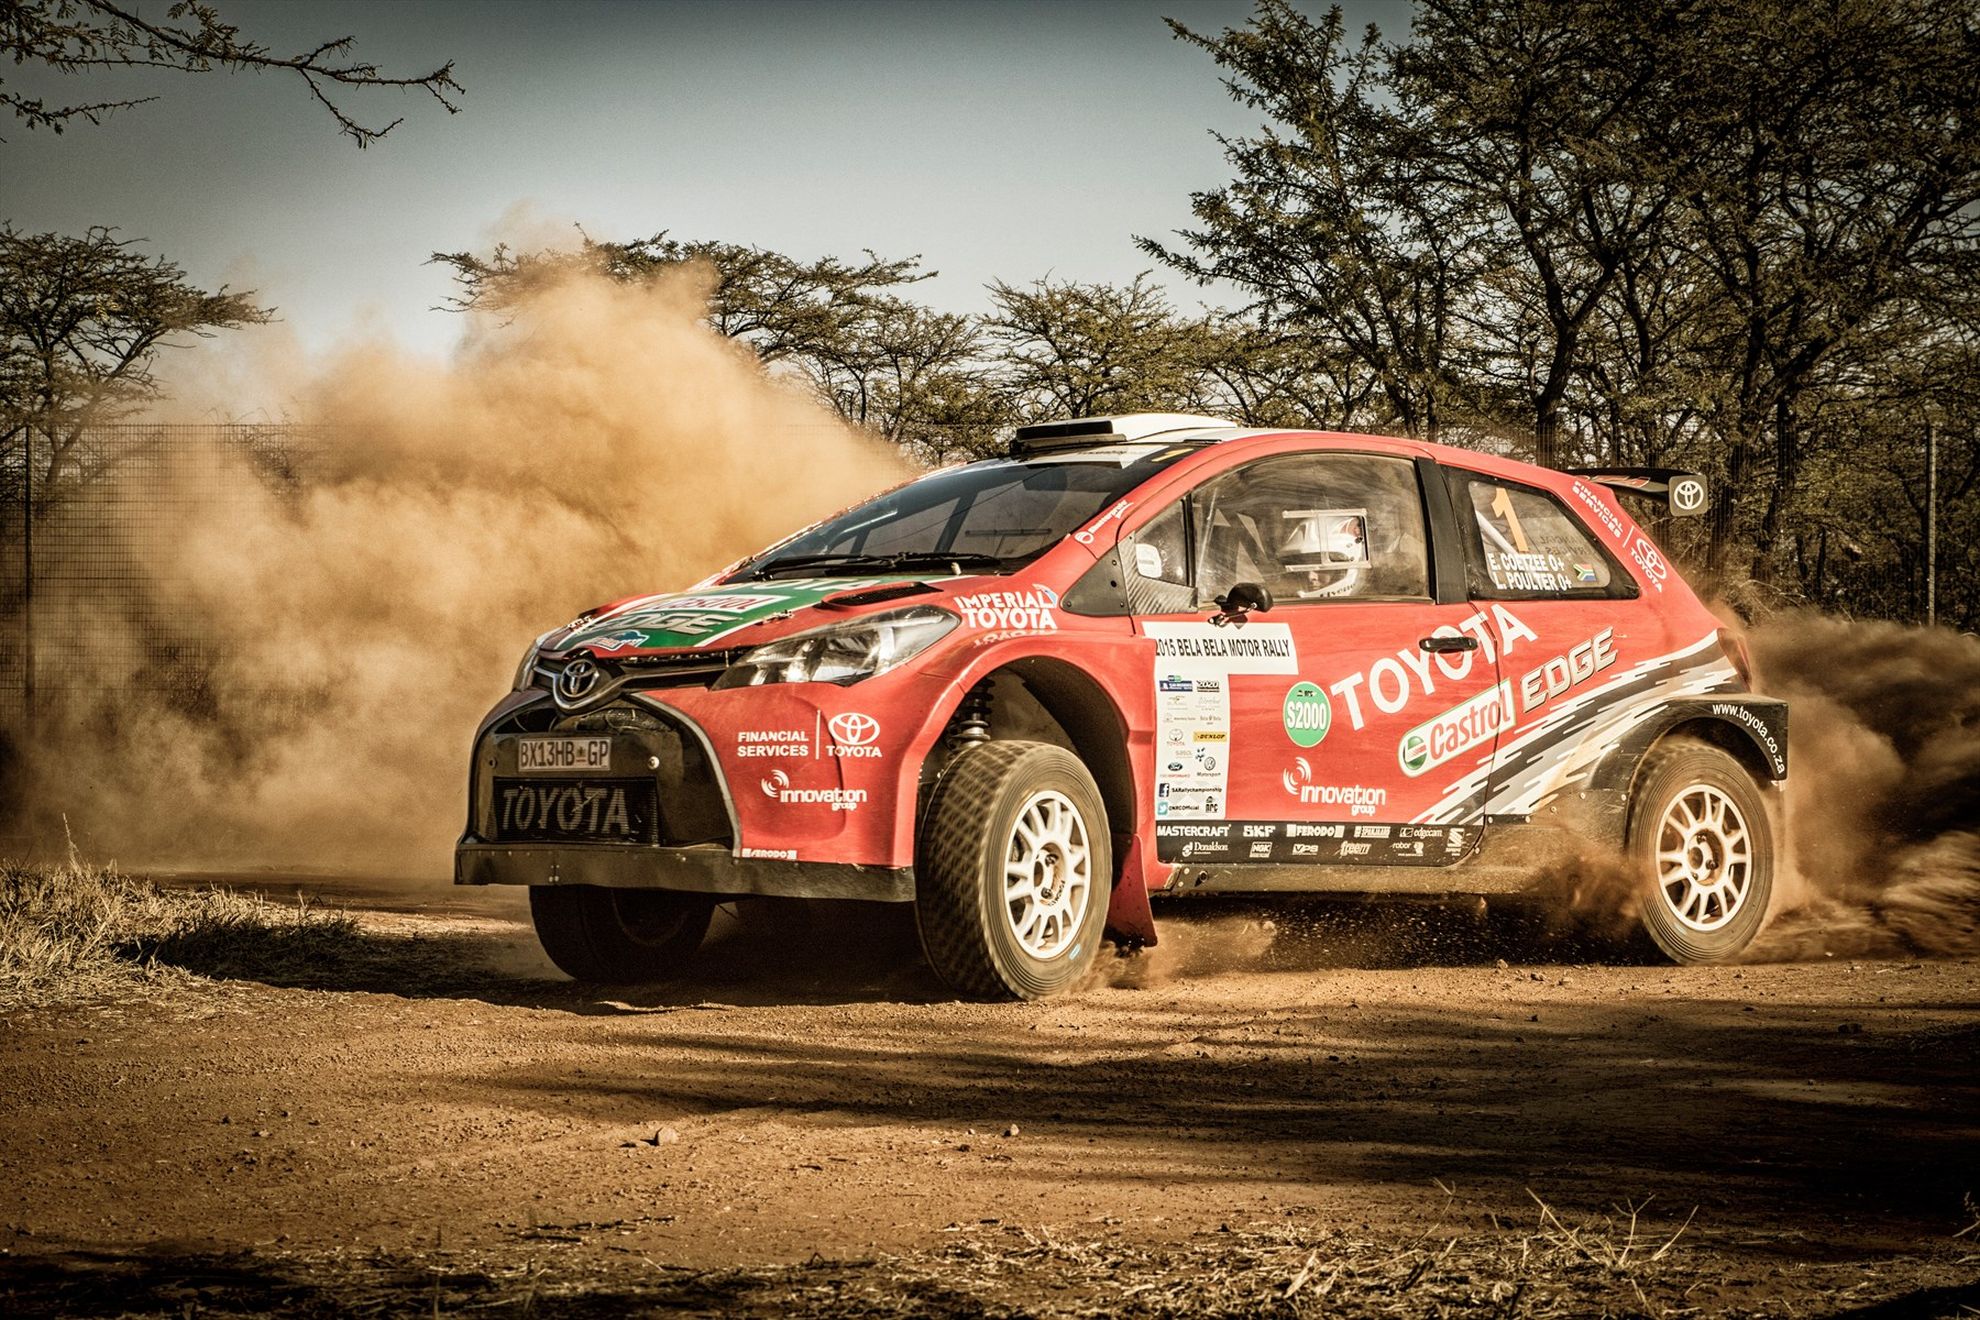 CASTROL TEAM TOYOTA TAKES THE FIGHT TO P.E. FOR ROUND 5 OF THE 2015 NATIONAL RALLY CHAMPIONSHIP